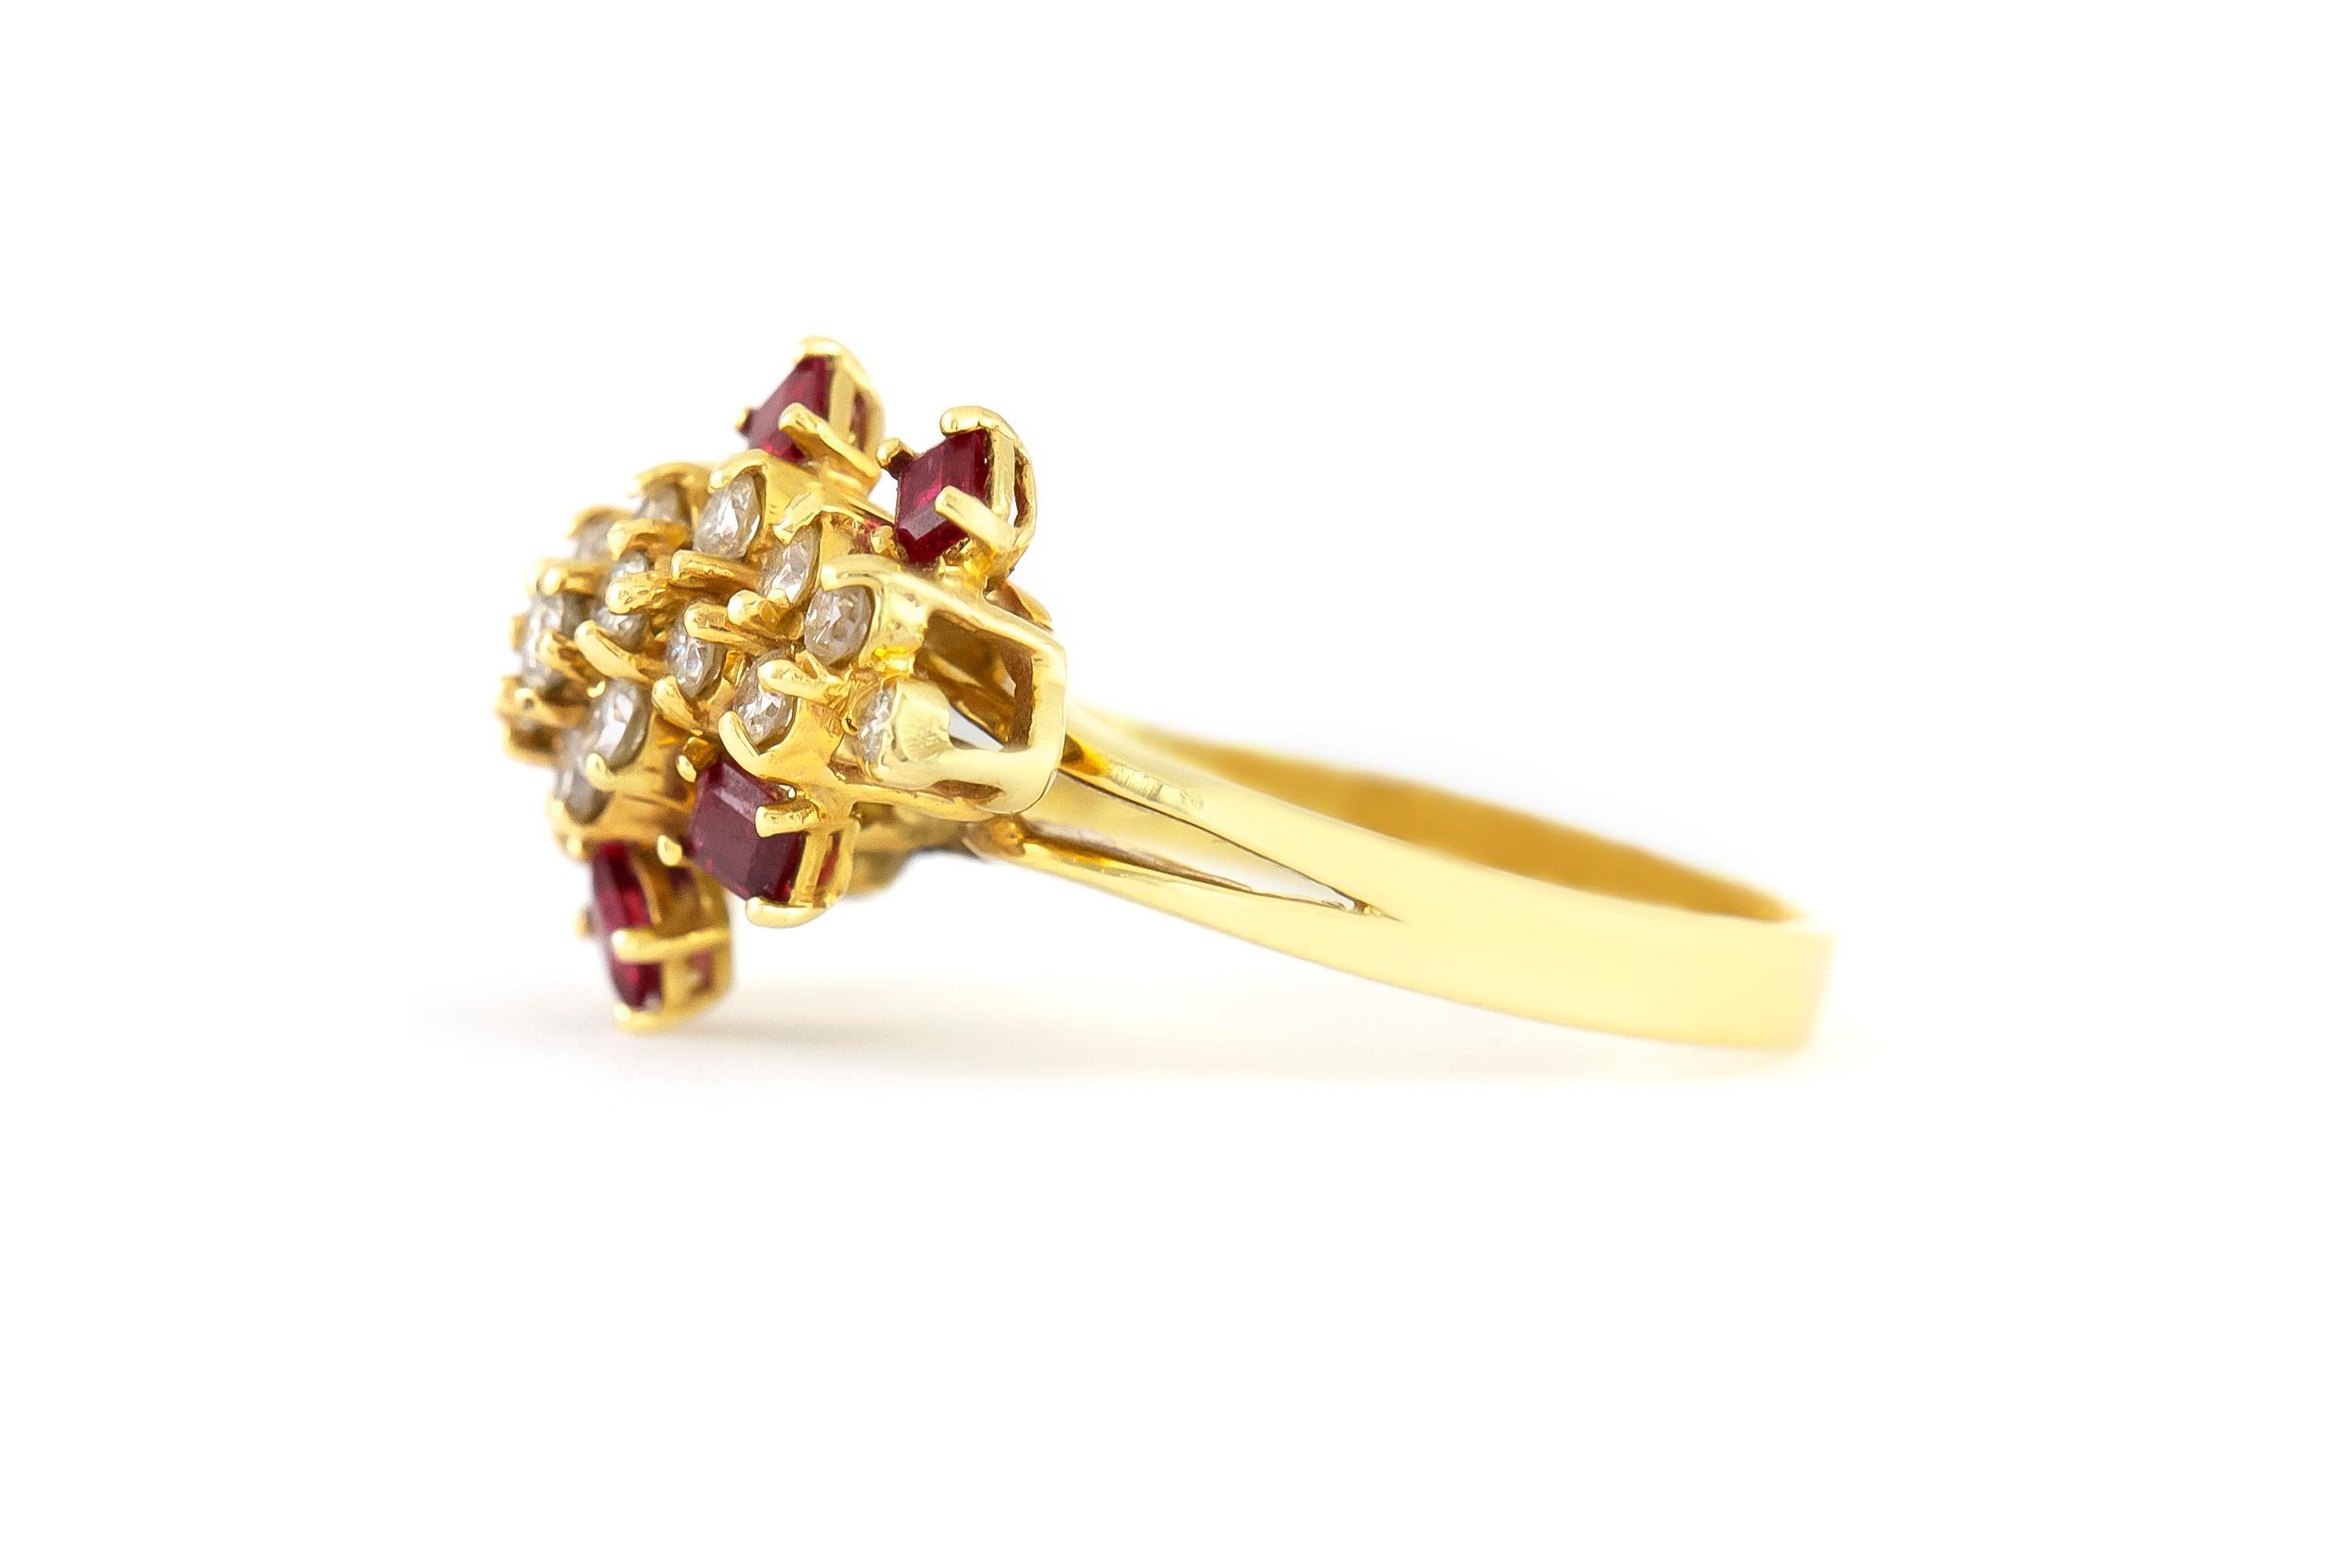 Finely crafted in 18k yellow gold with round cut diamonds weighing approximately a total of 0.60 carats, and square cut rubies weighing approximately a total of 1.00 carat.
Circa 1970.
Size 8, resizable